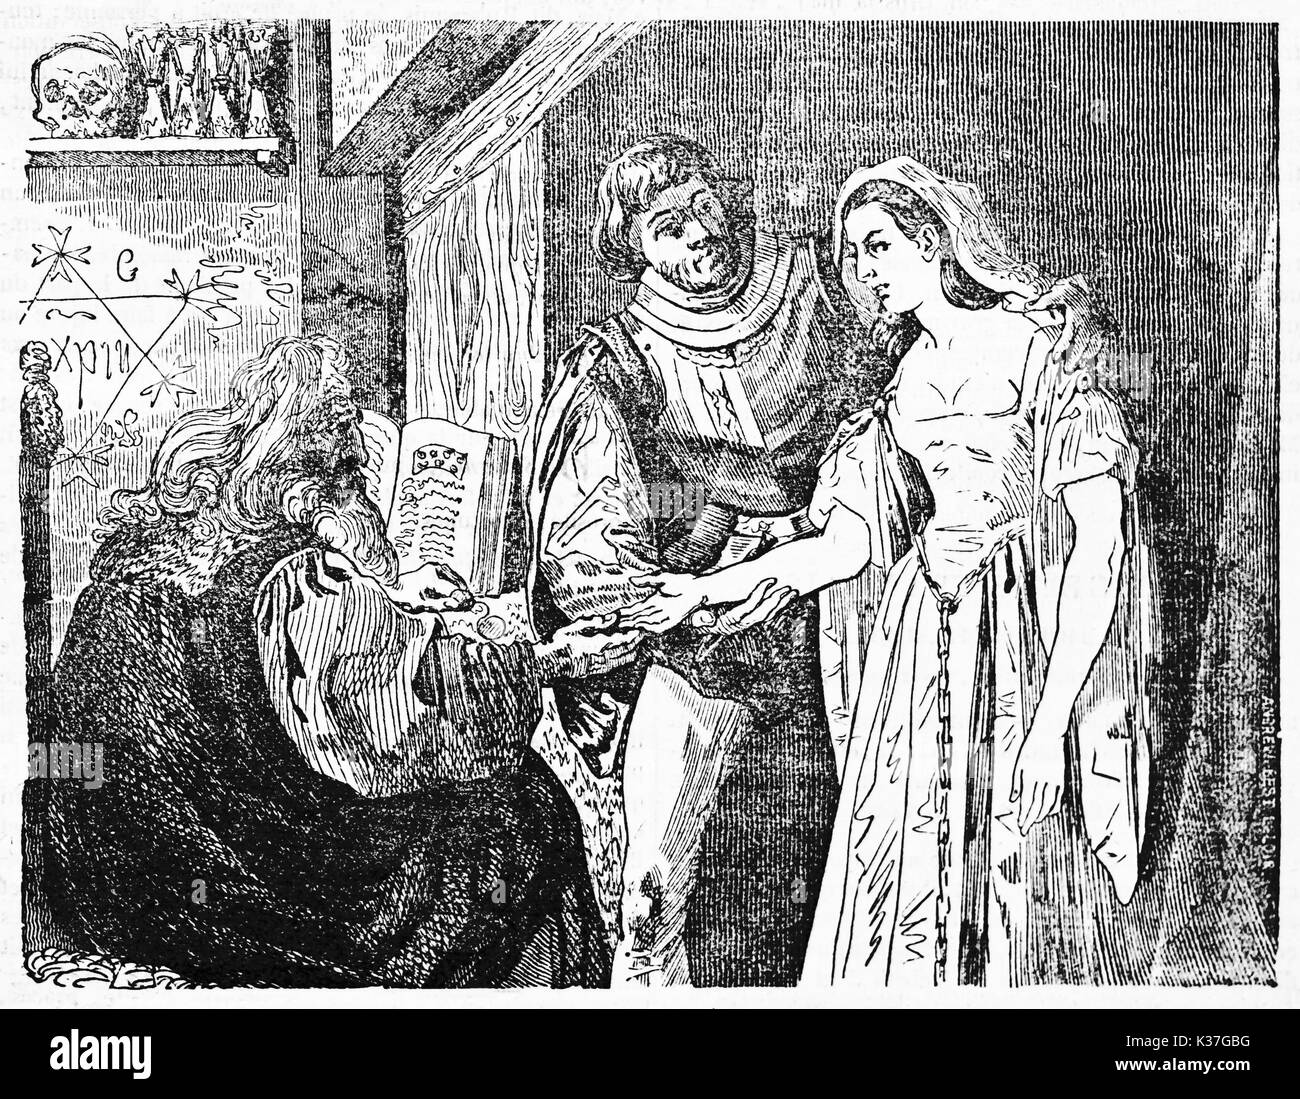 Fortune teller reads woman hand in a esoteric chiromancy room. Old Illustration by unidentified author, published on Magasin Pittoresque, Paris, 1834 Stock Photo